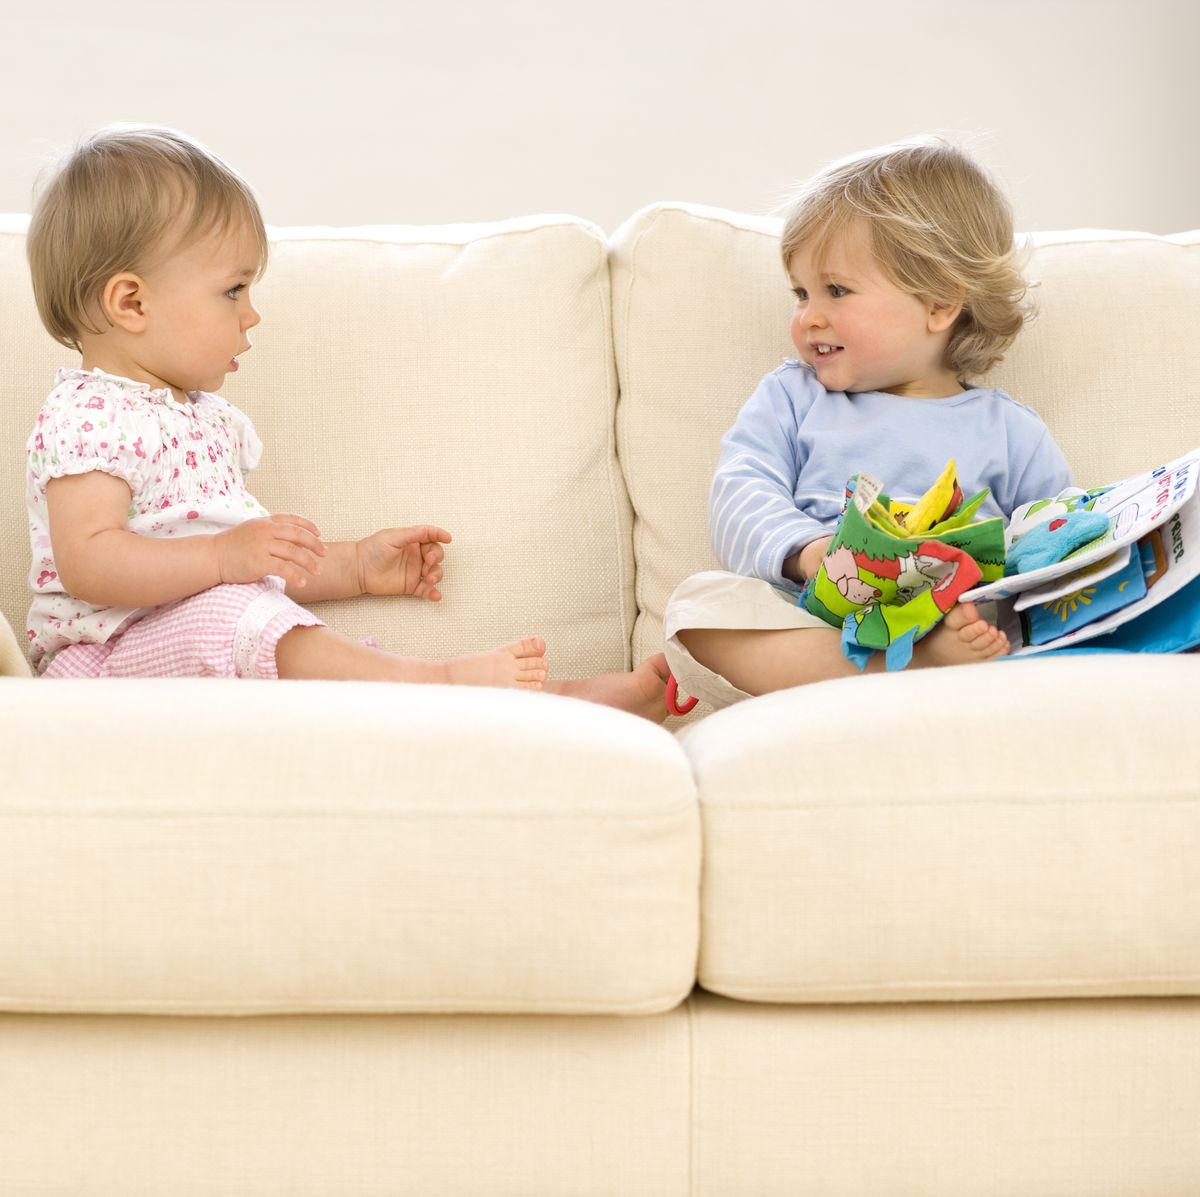 Baby girl (9-12 months) looking at toddler boy (12-15 months) on sofa with toys, side view